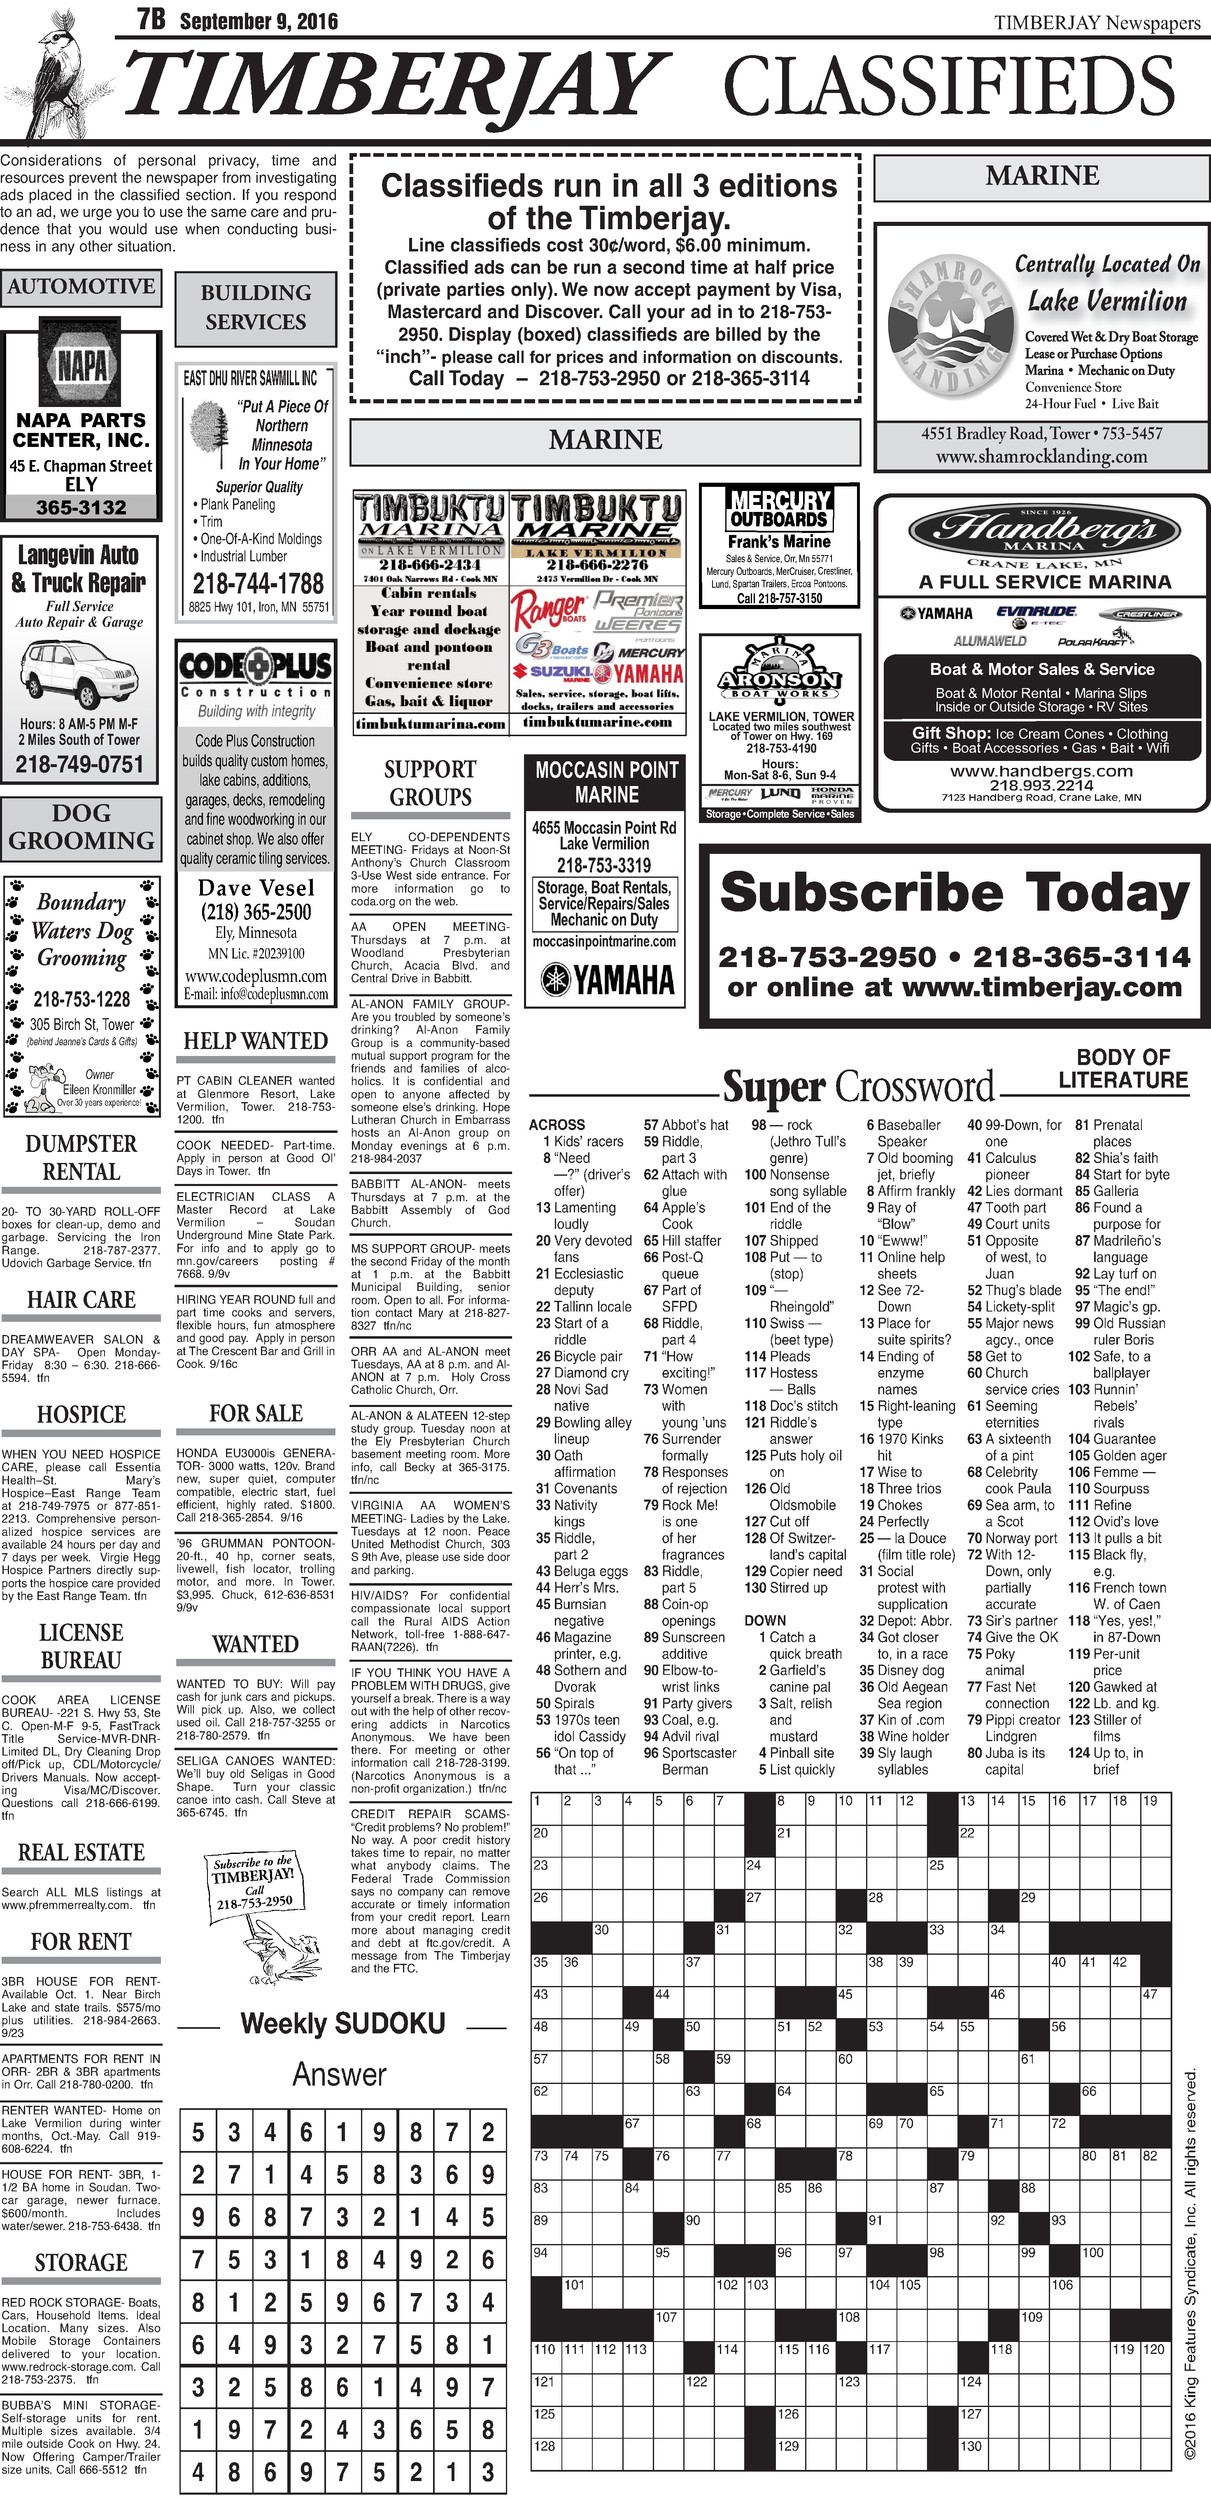 Click here to see the legal notices and classifieds on page 7B